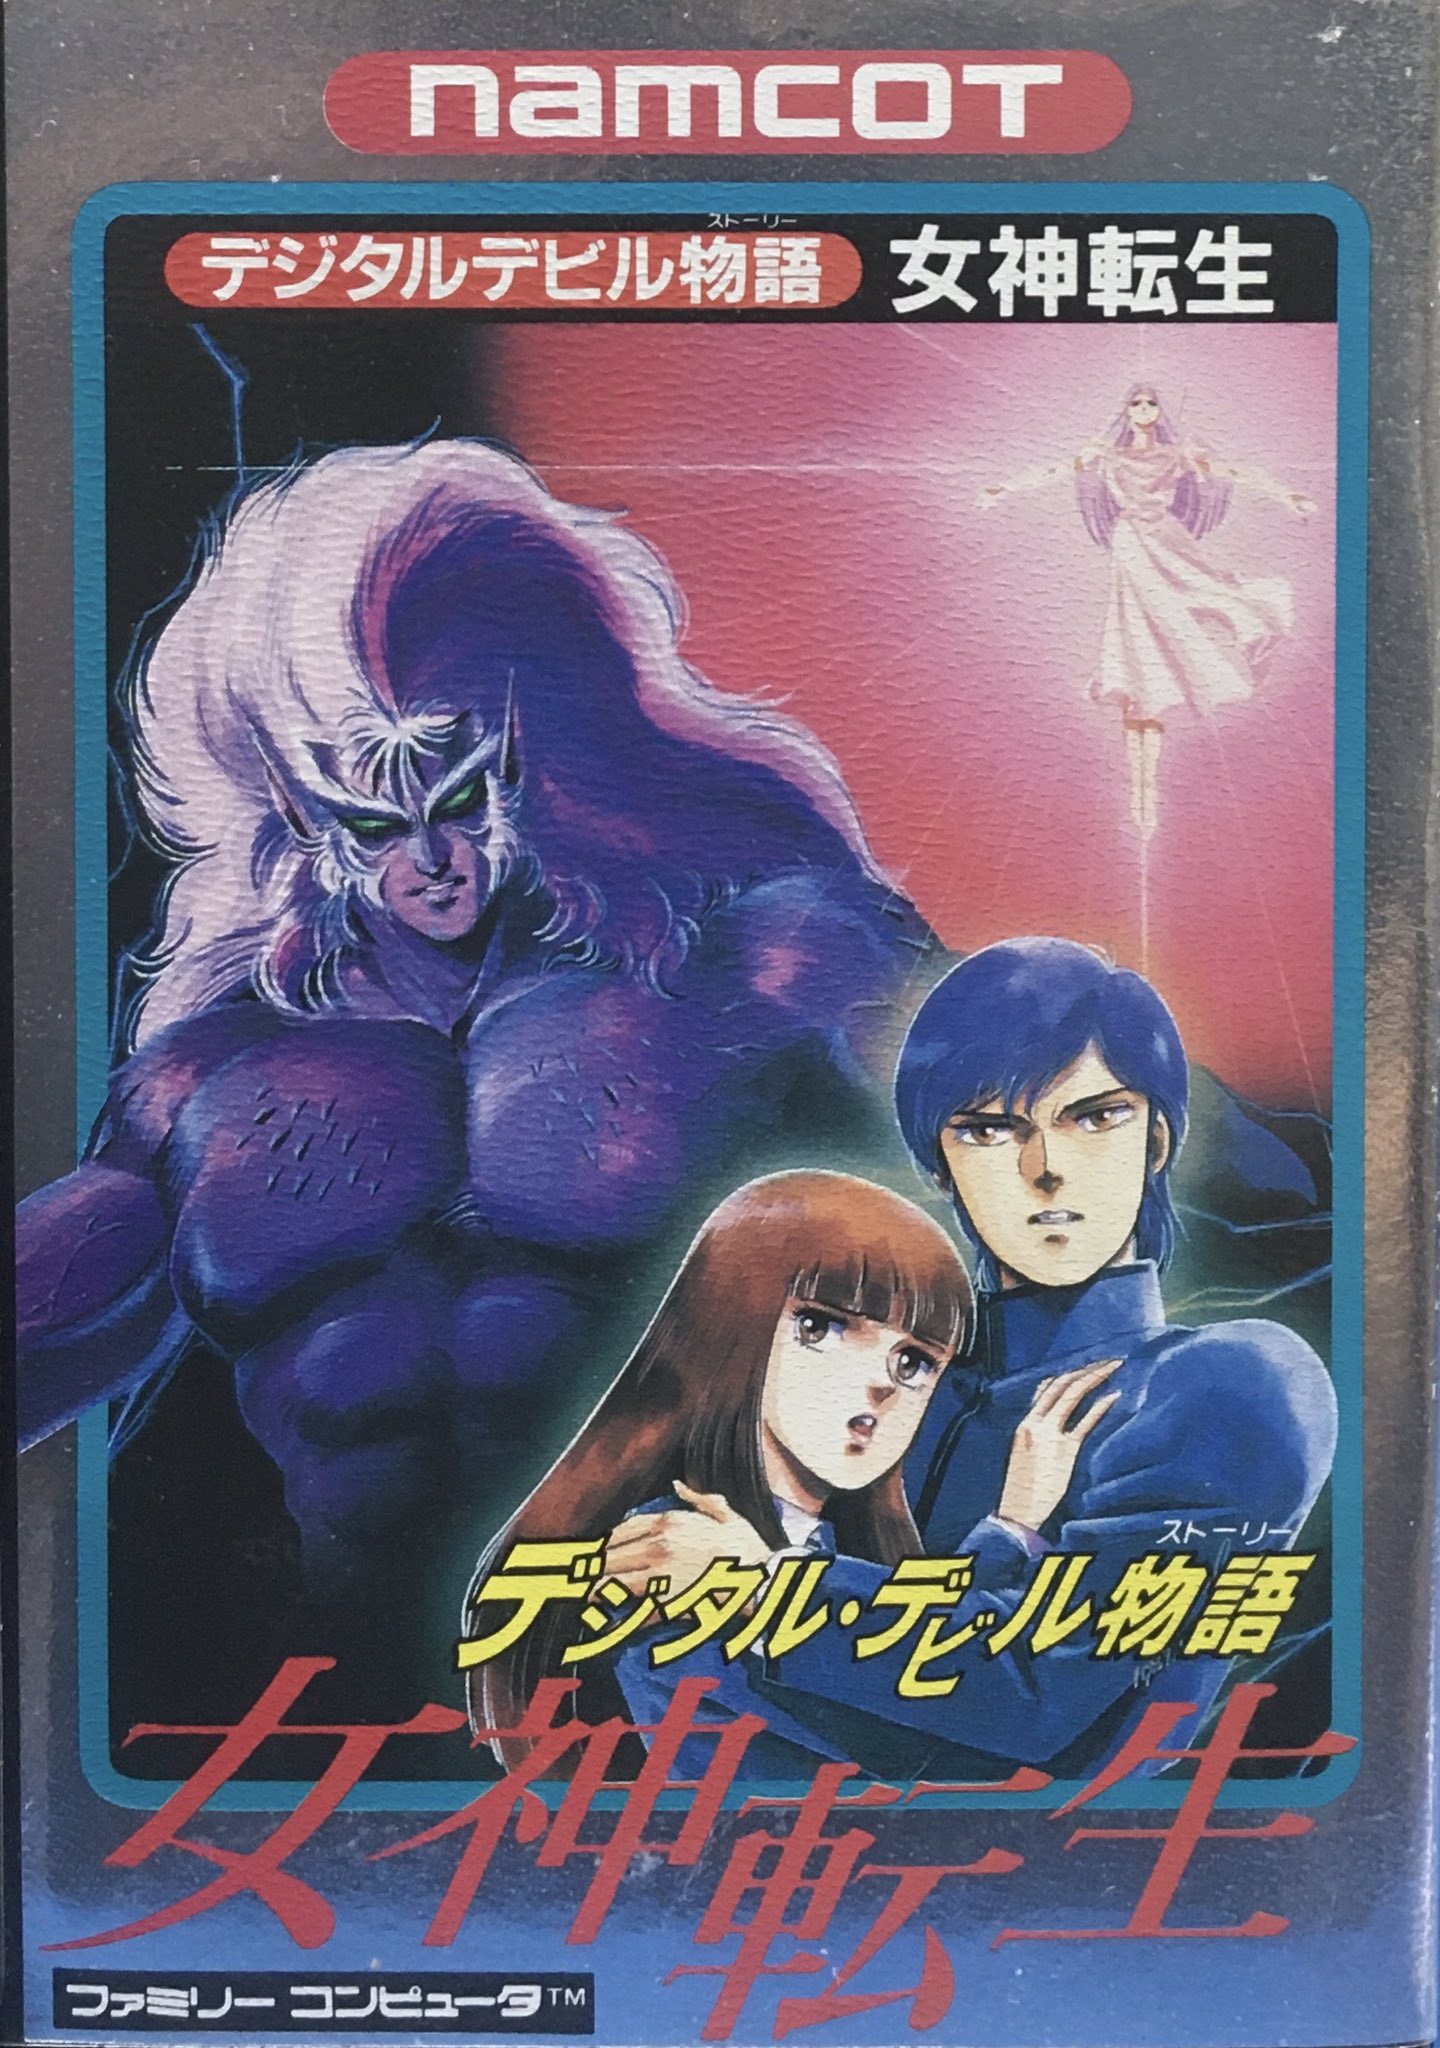 digital-devil-story-megami-tensei-strategywiki-the-video-game-walkthrough-and-strategy-guide